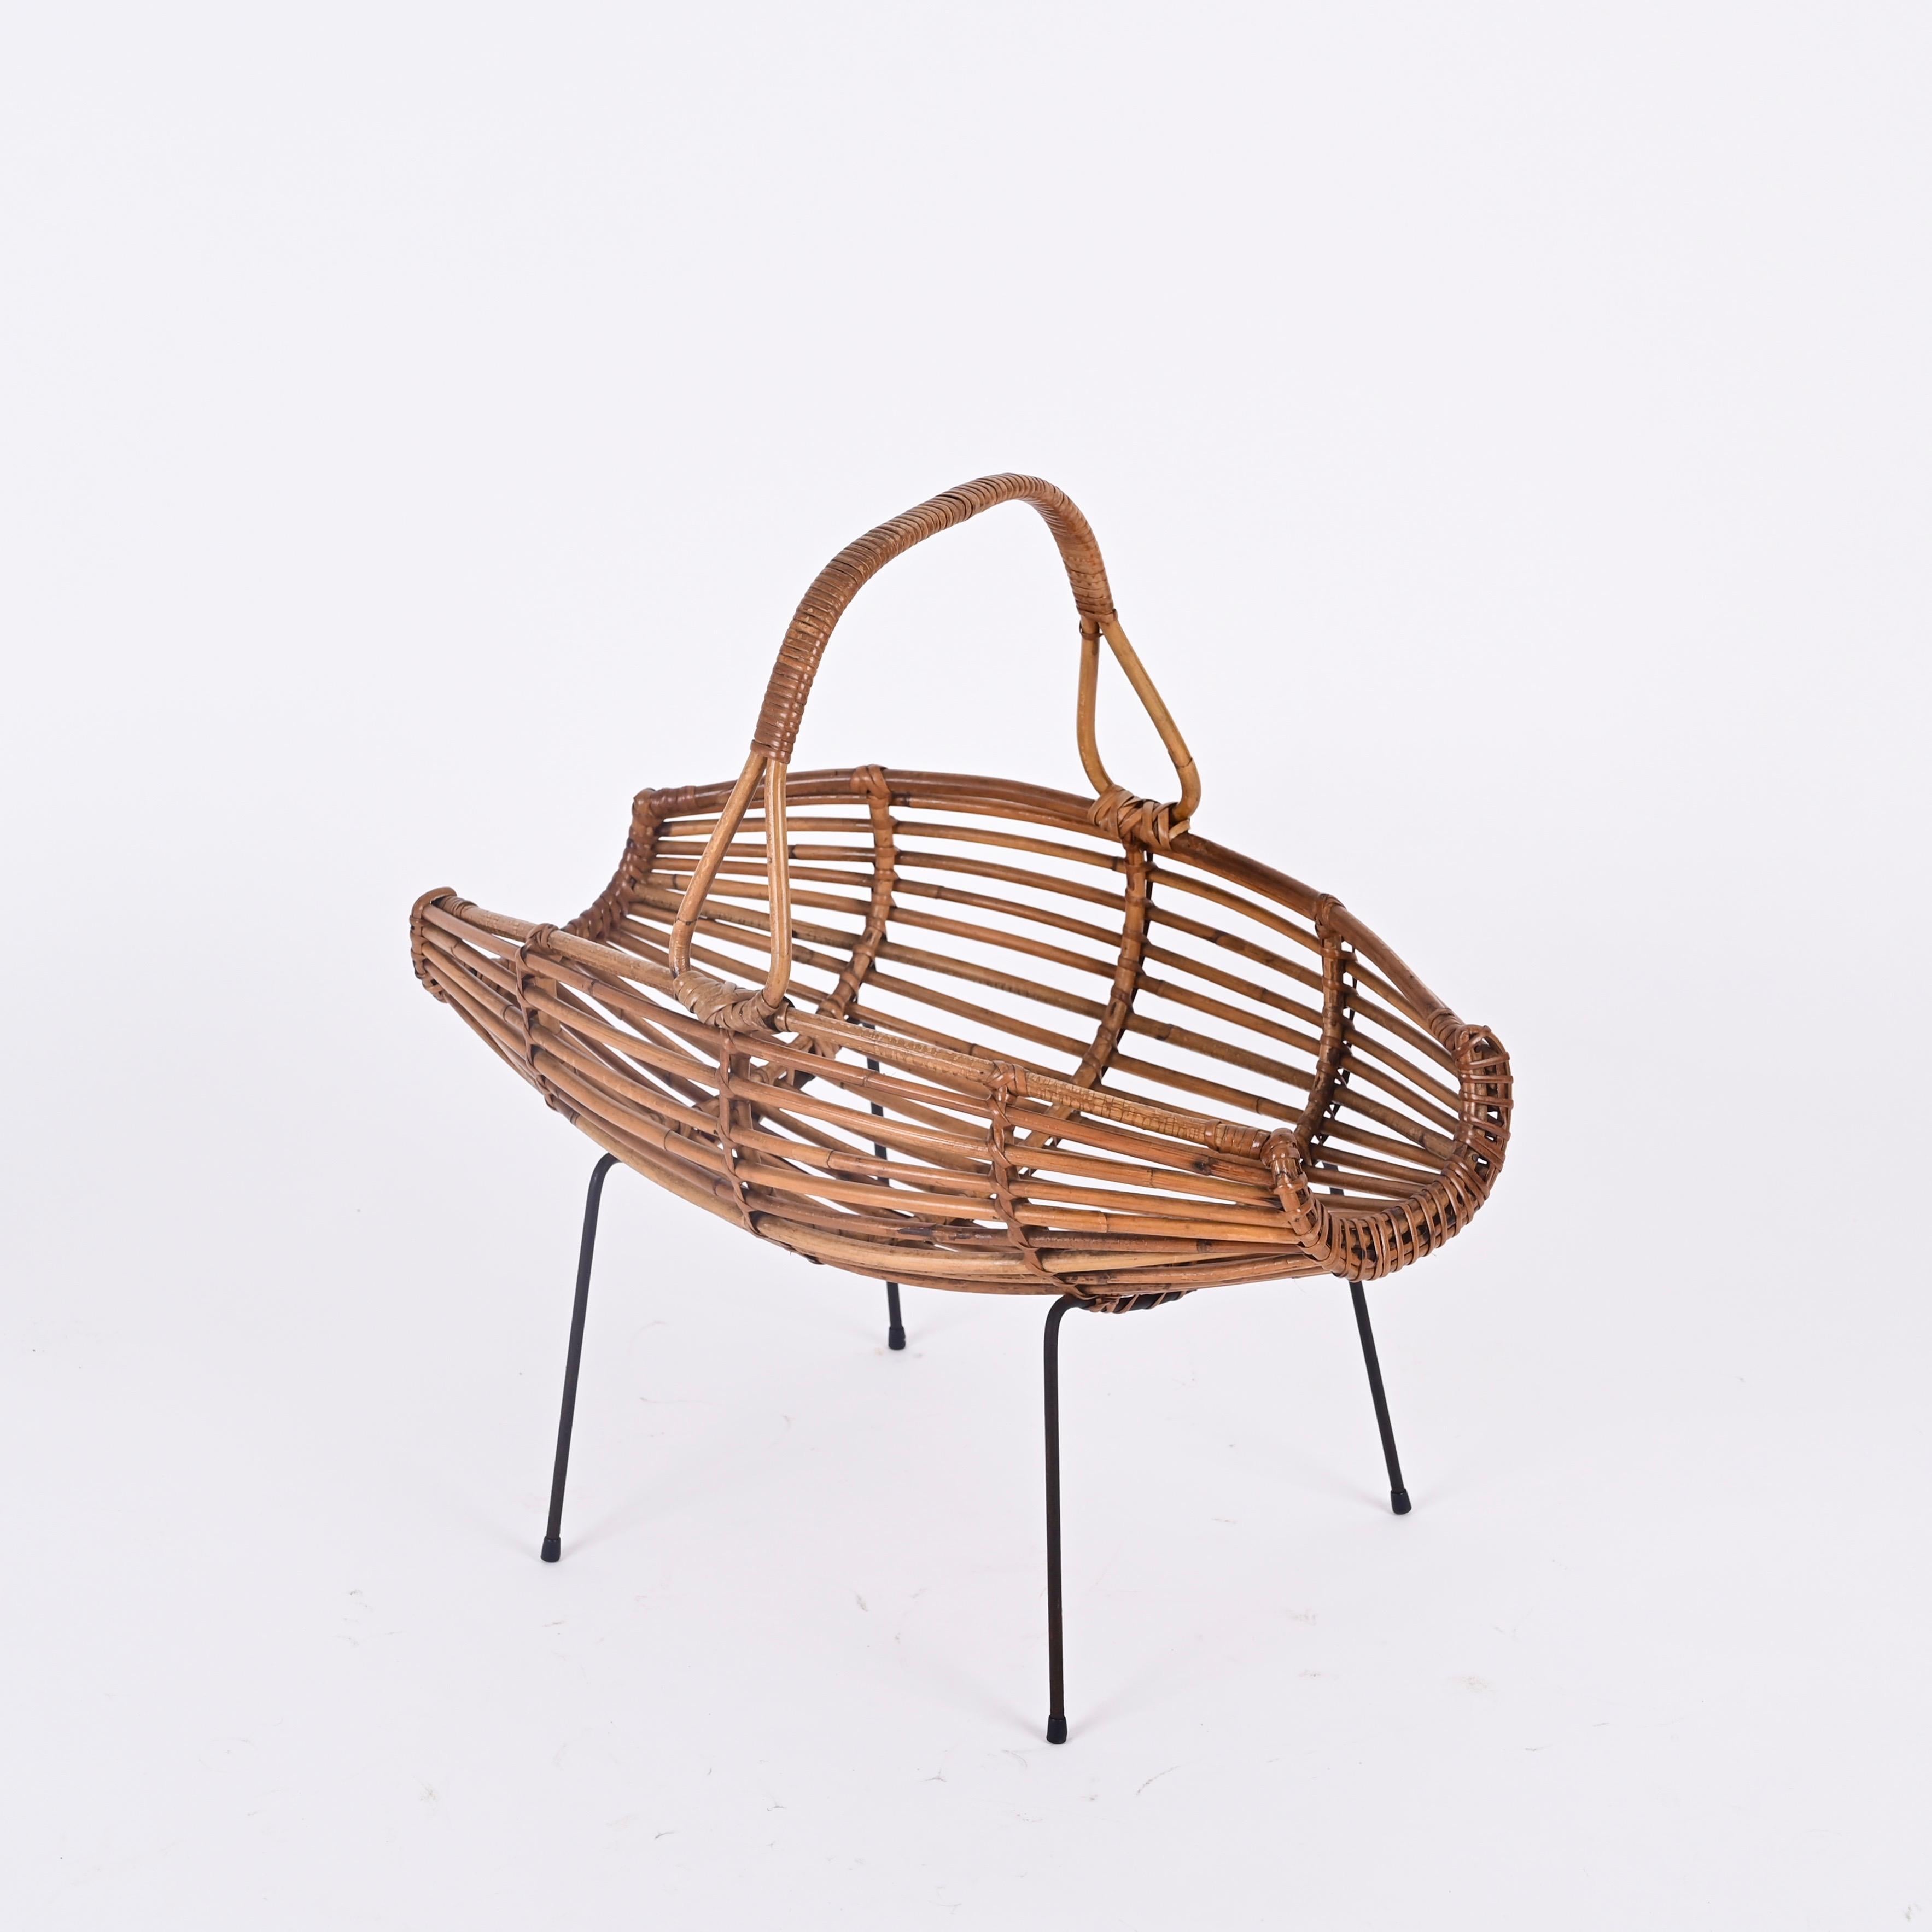 Stunning Midcentury French Riviera magazine rack made in a beautiful combination of curved rattan, woven wicker and enameled black iron. This charming object was made in Italy during the 1950s.

This delightful magazine rack feature a black enameled